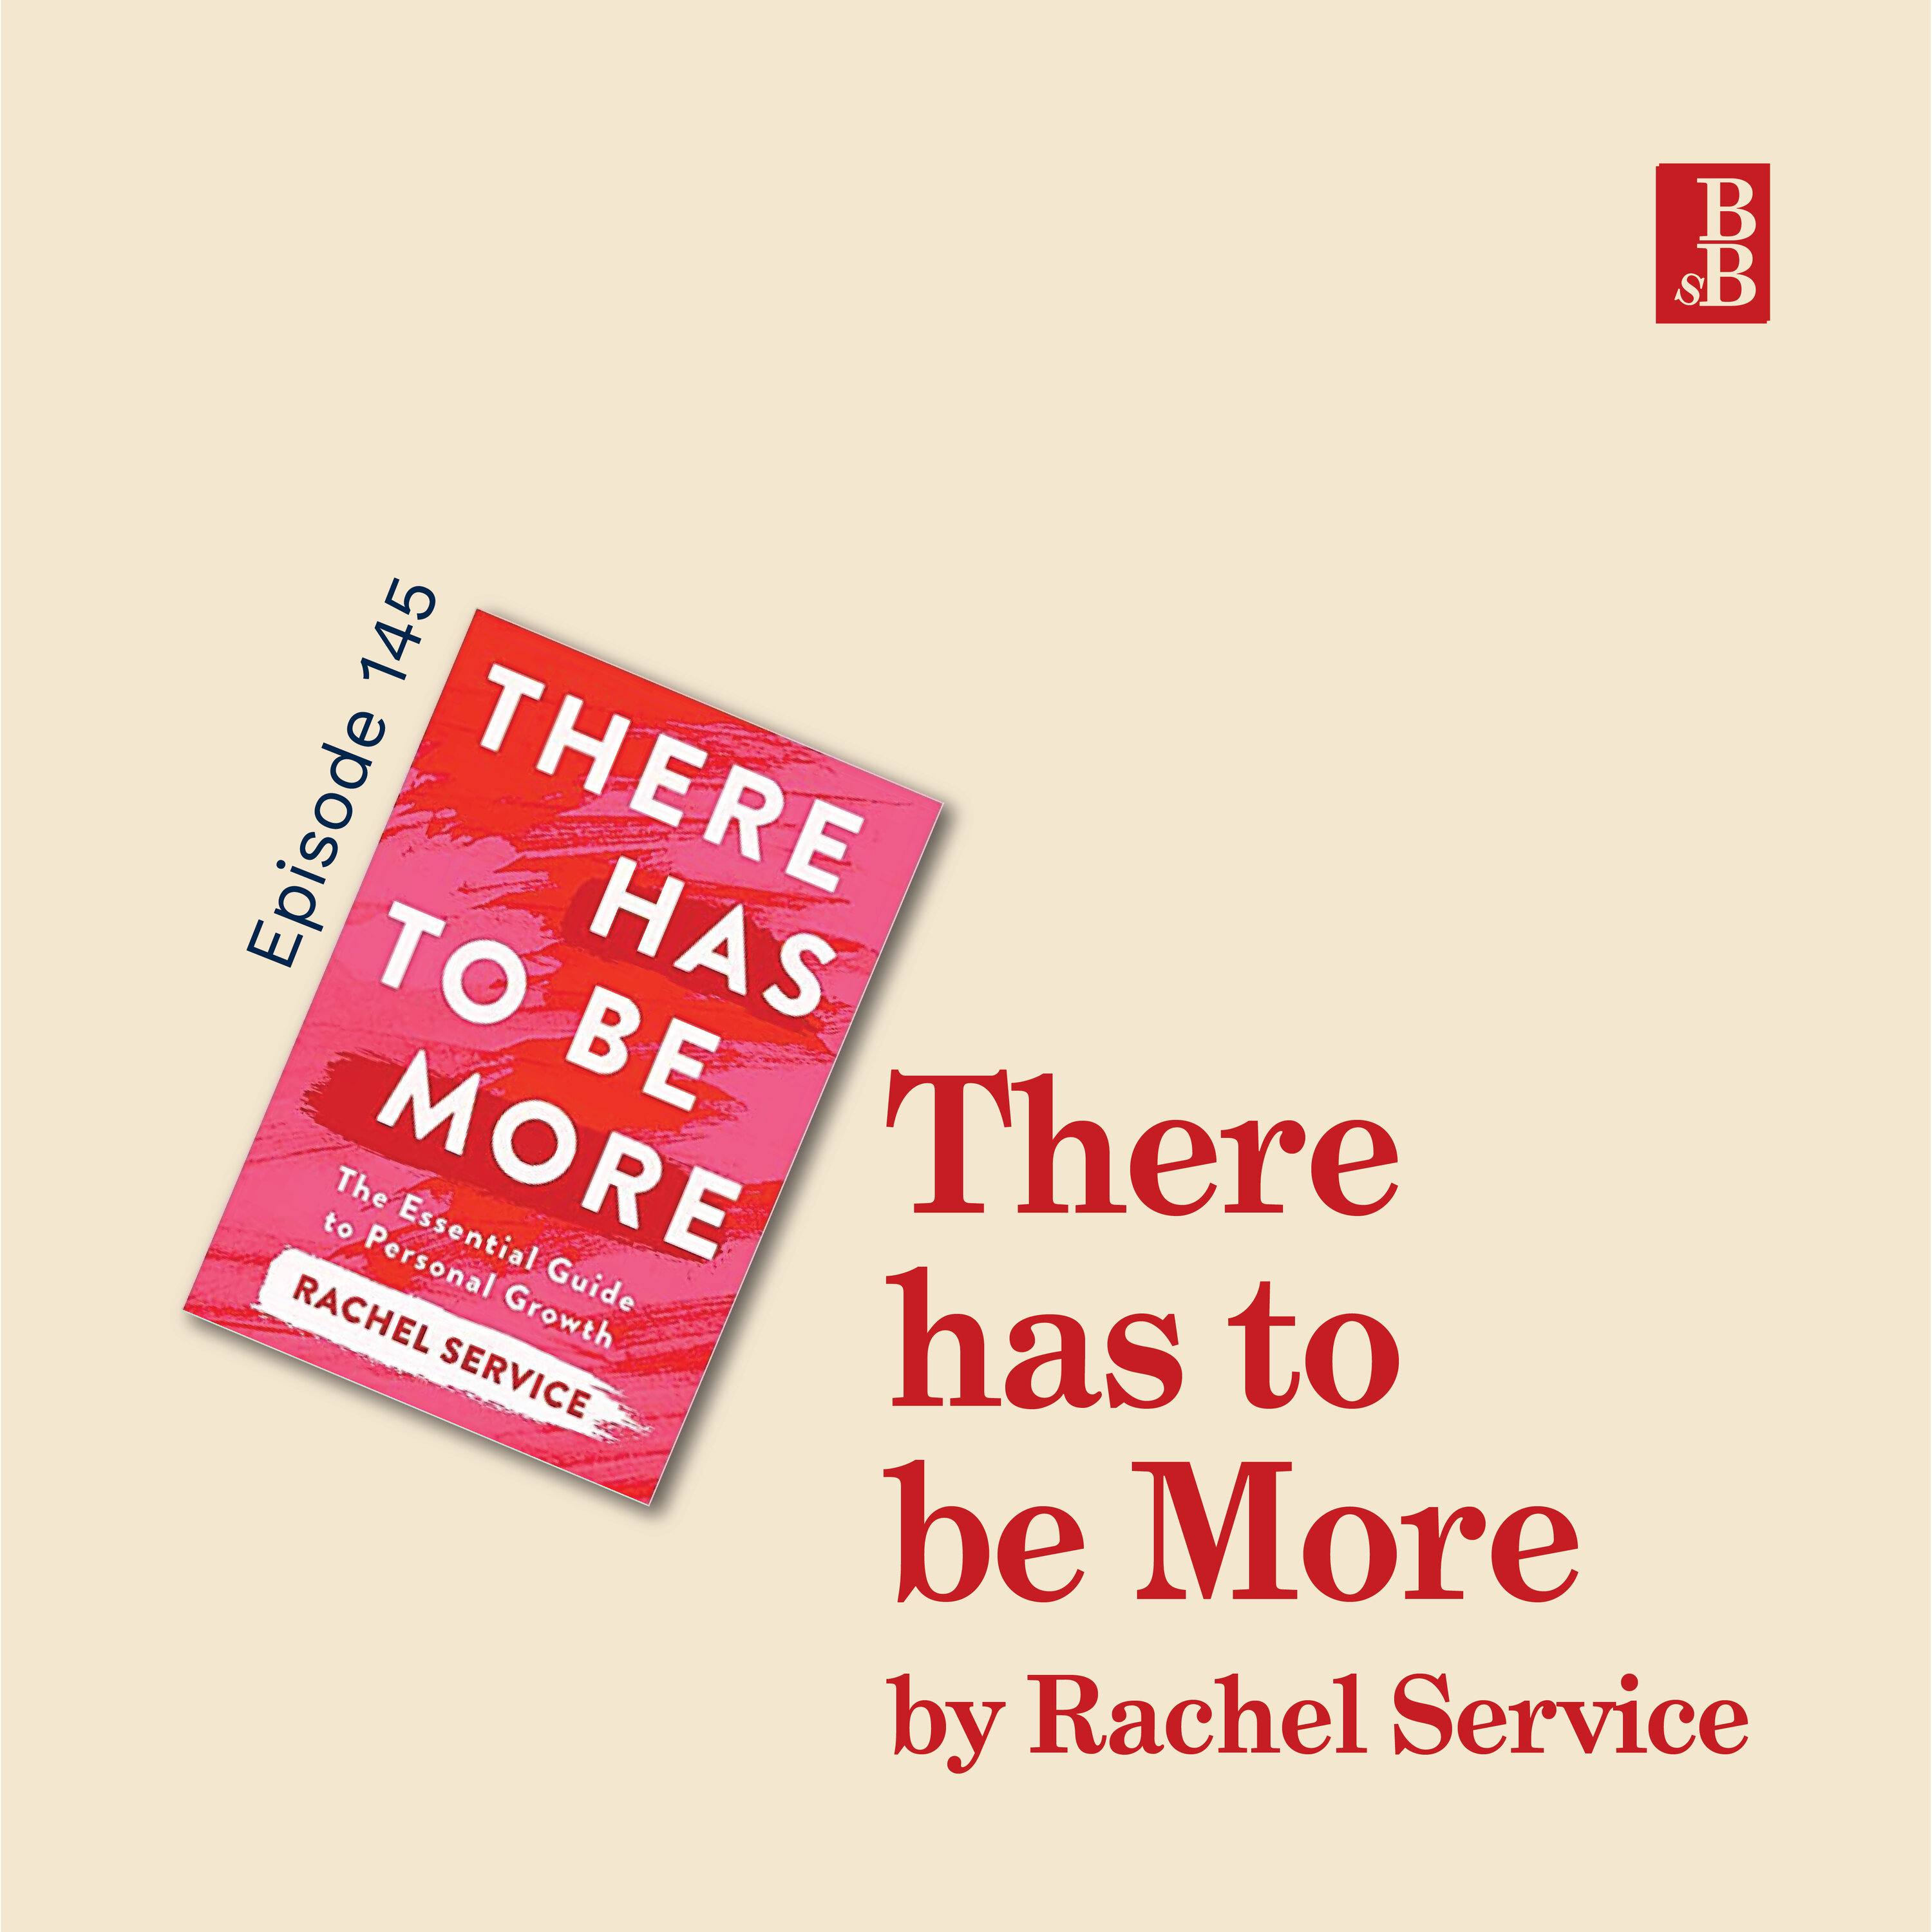 There Has to be More by Rachel Service: how to achieve your goals